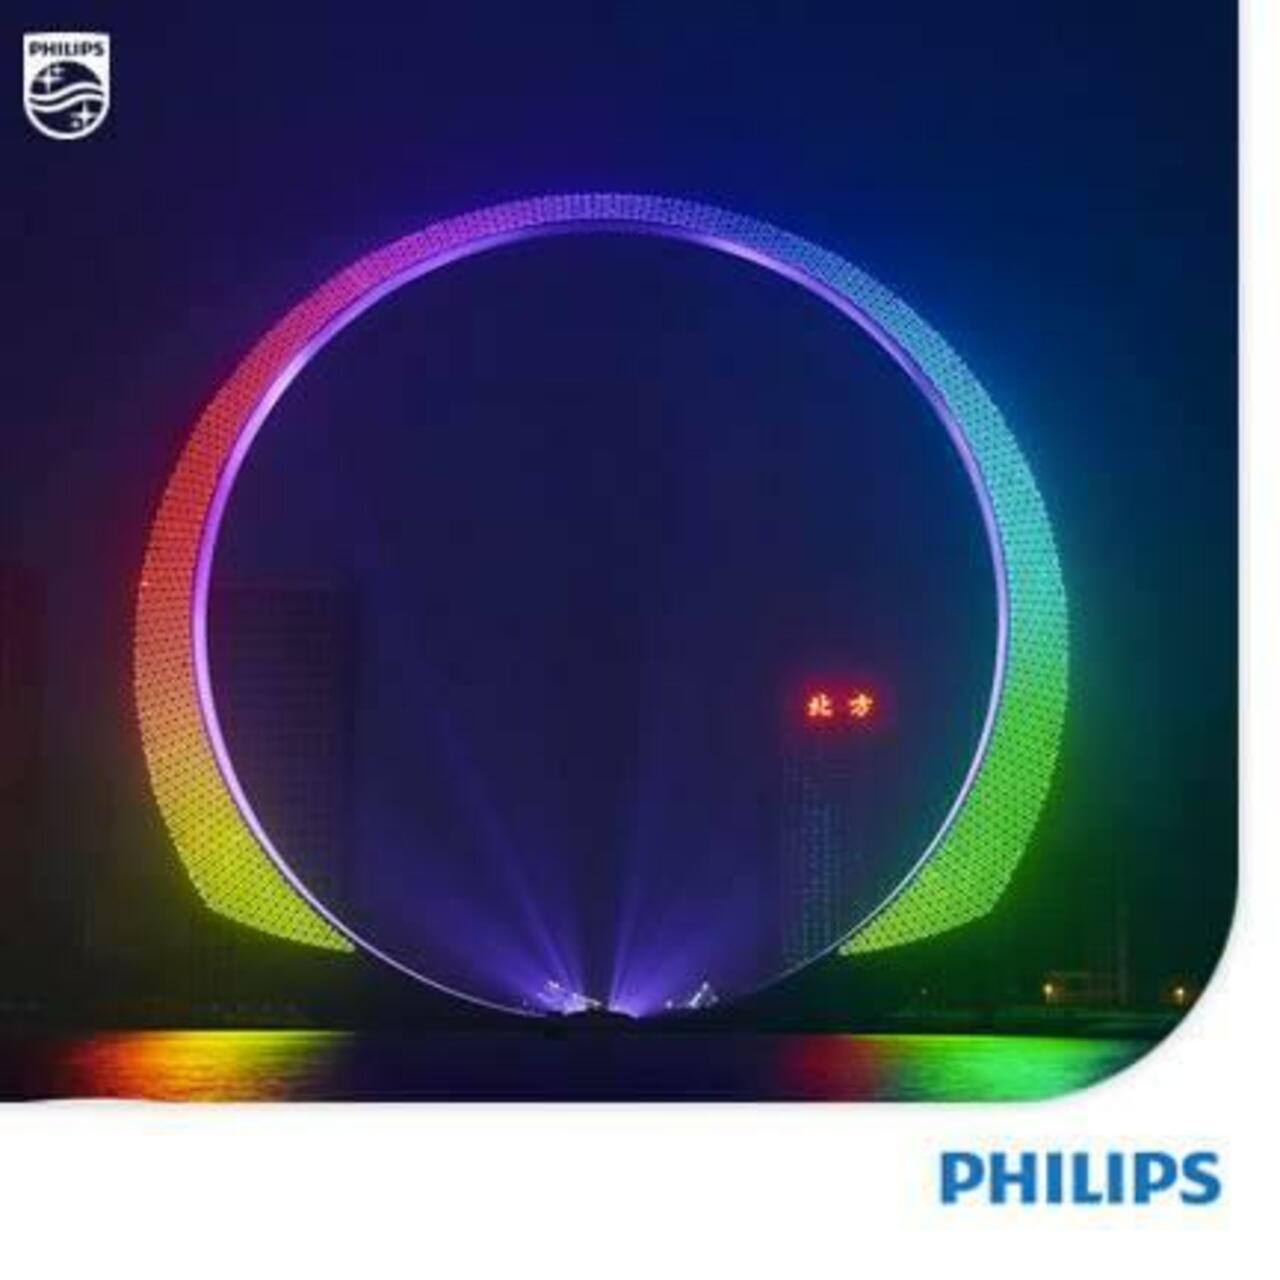 #LightArt Stunning light sculptures are branding city skylines. Celebrate interactive lighting http://philips.to/1A0GwcX http://t.co/WNsJmejUXh